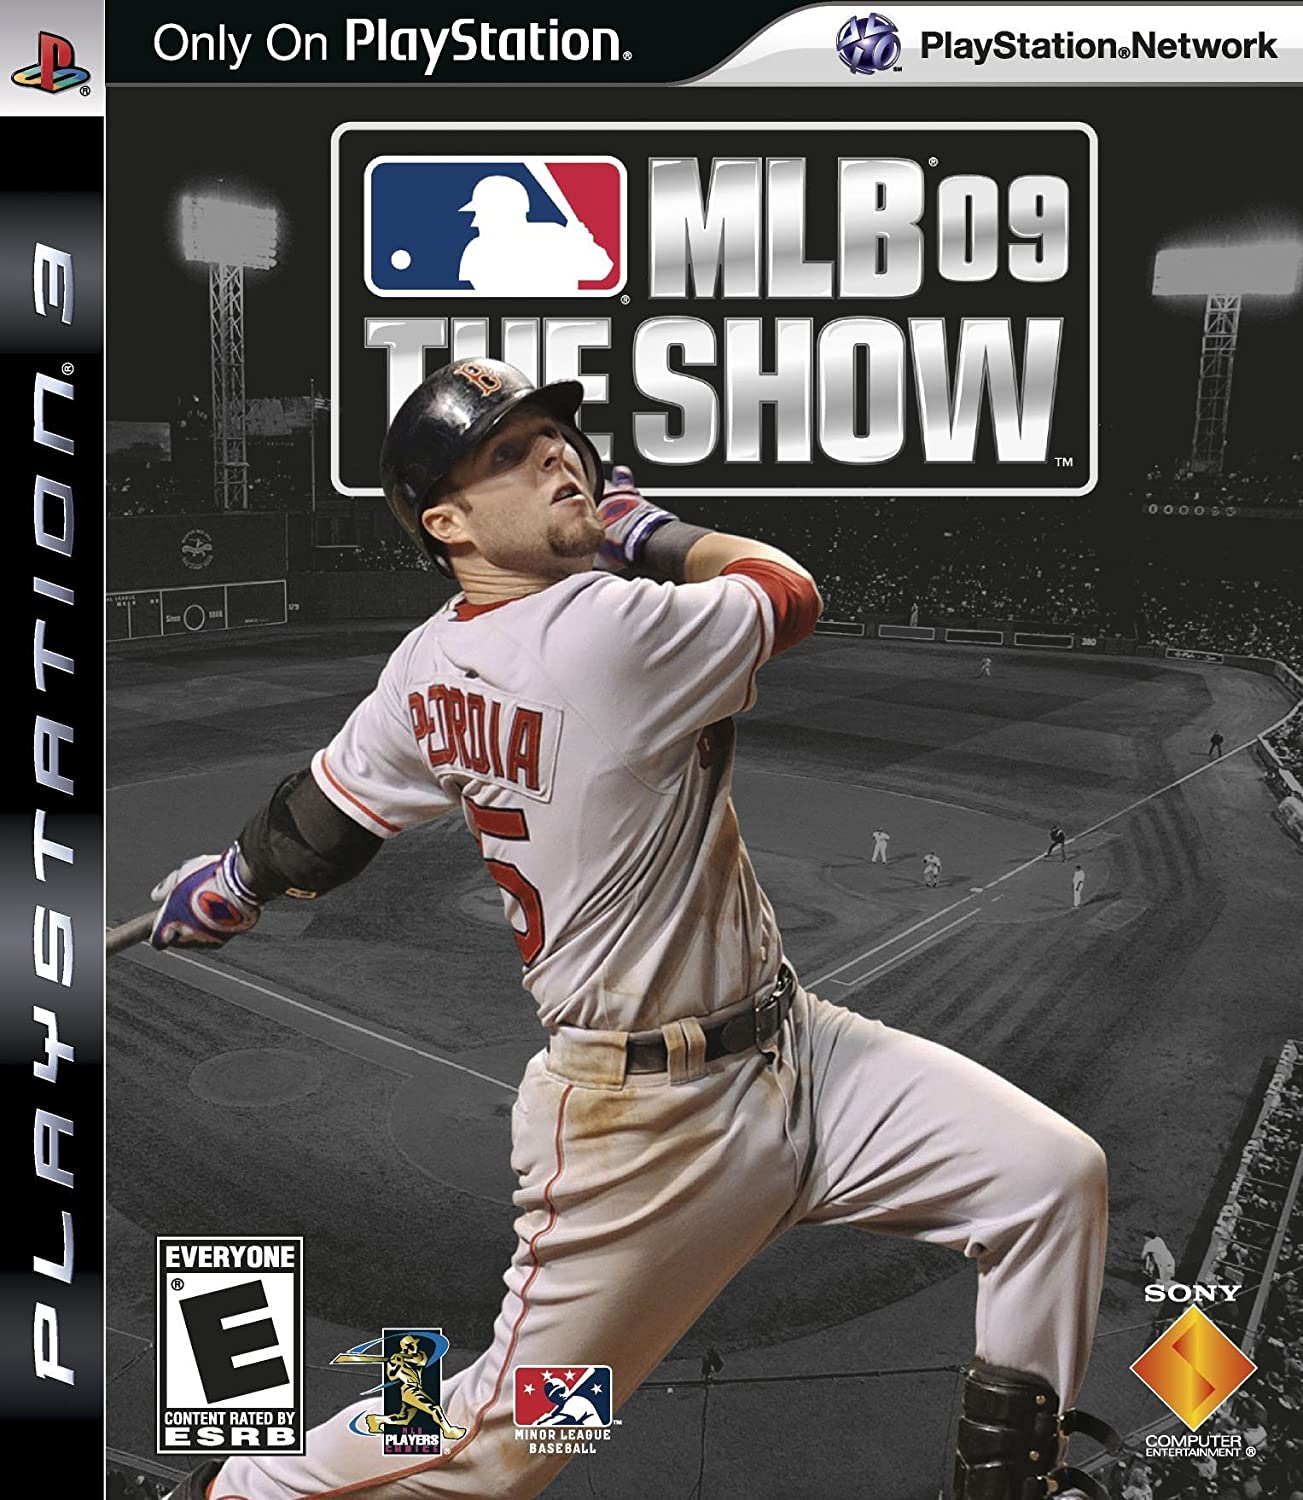 MLB 09: The Show - Darkside Records